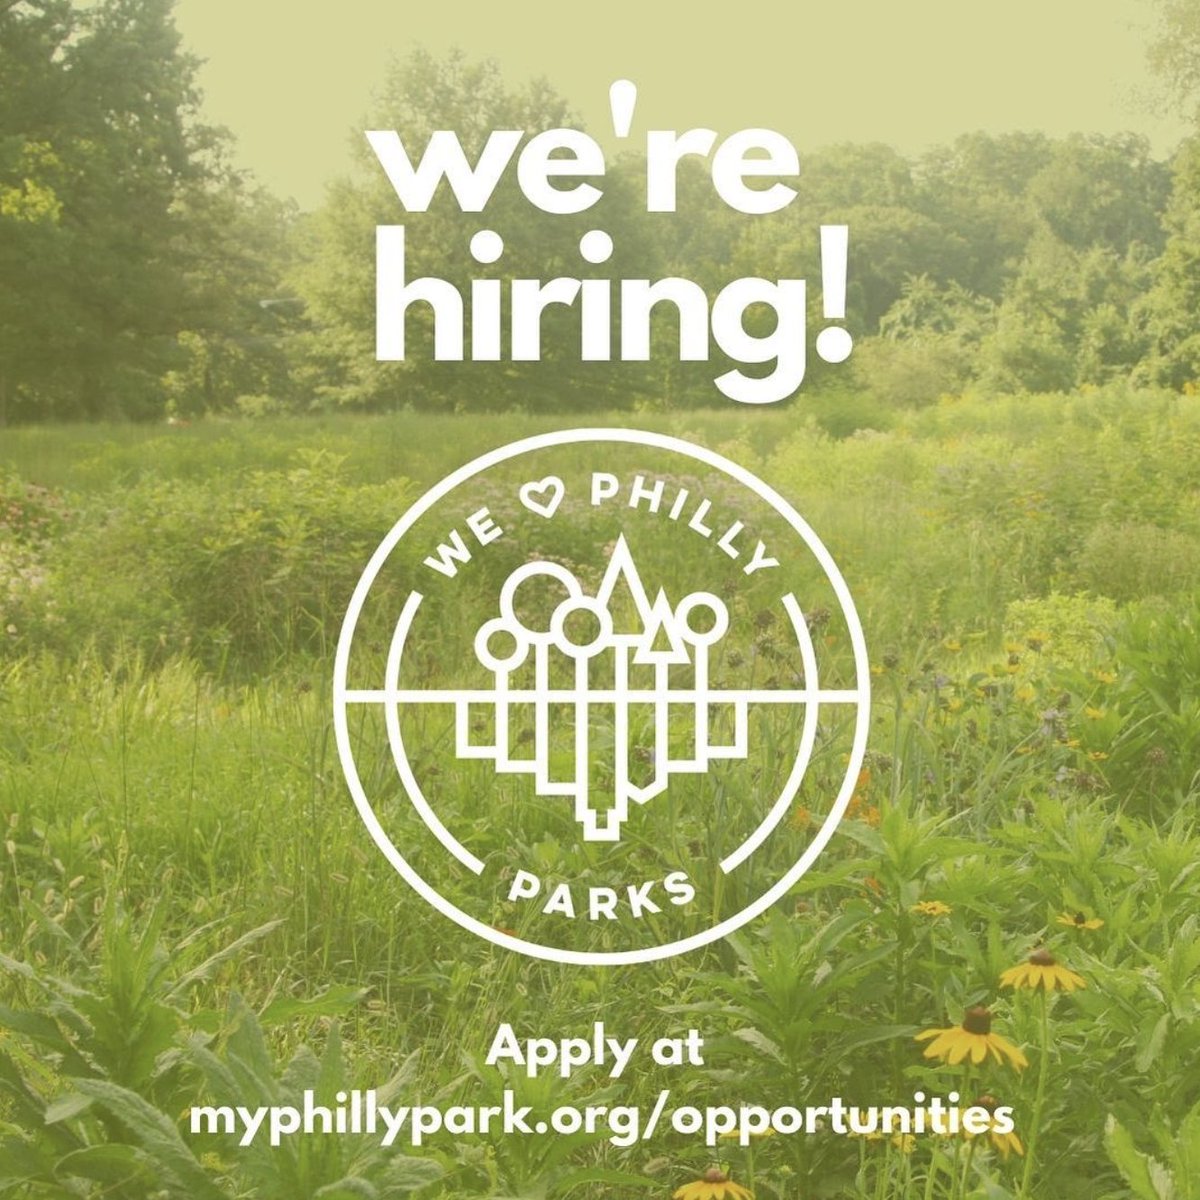 Reminder: We're still accepting applications for four different opportunities to work with our team: a Capital Projects Manager, a Natural Lands Field Coordinator, a Park Program Leader, and a Request for Proposals: FDR Park Boating Events. Visit myphillypark.org/opportunities to apply!